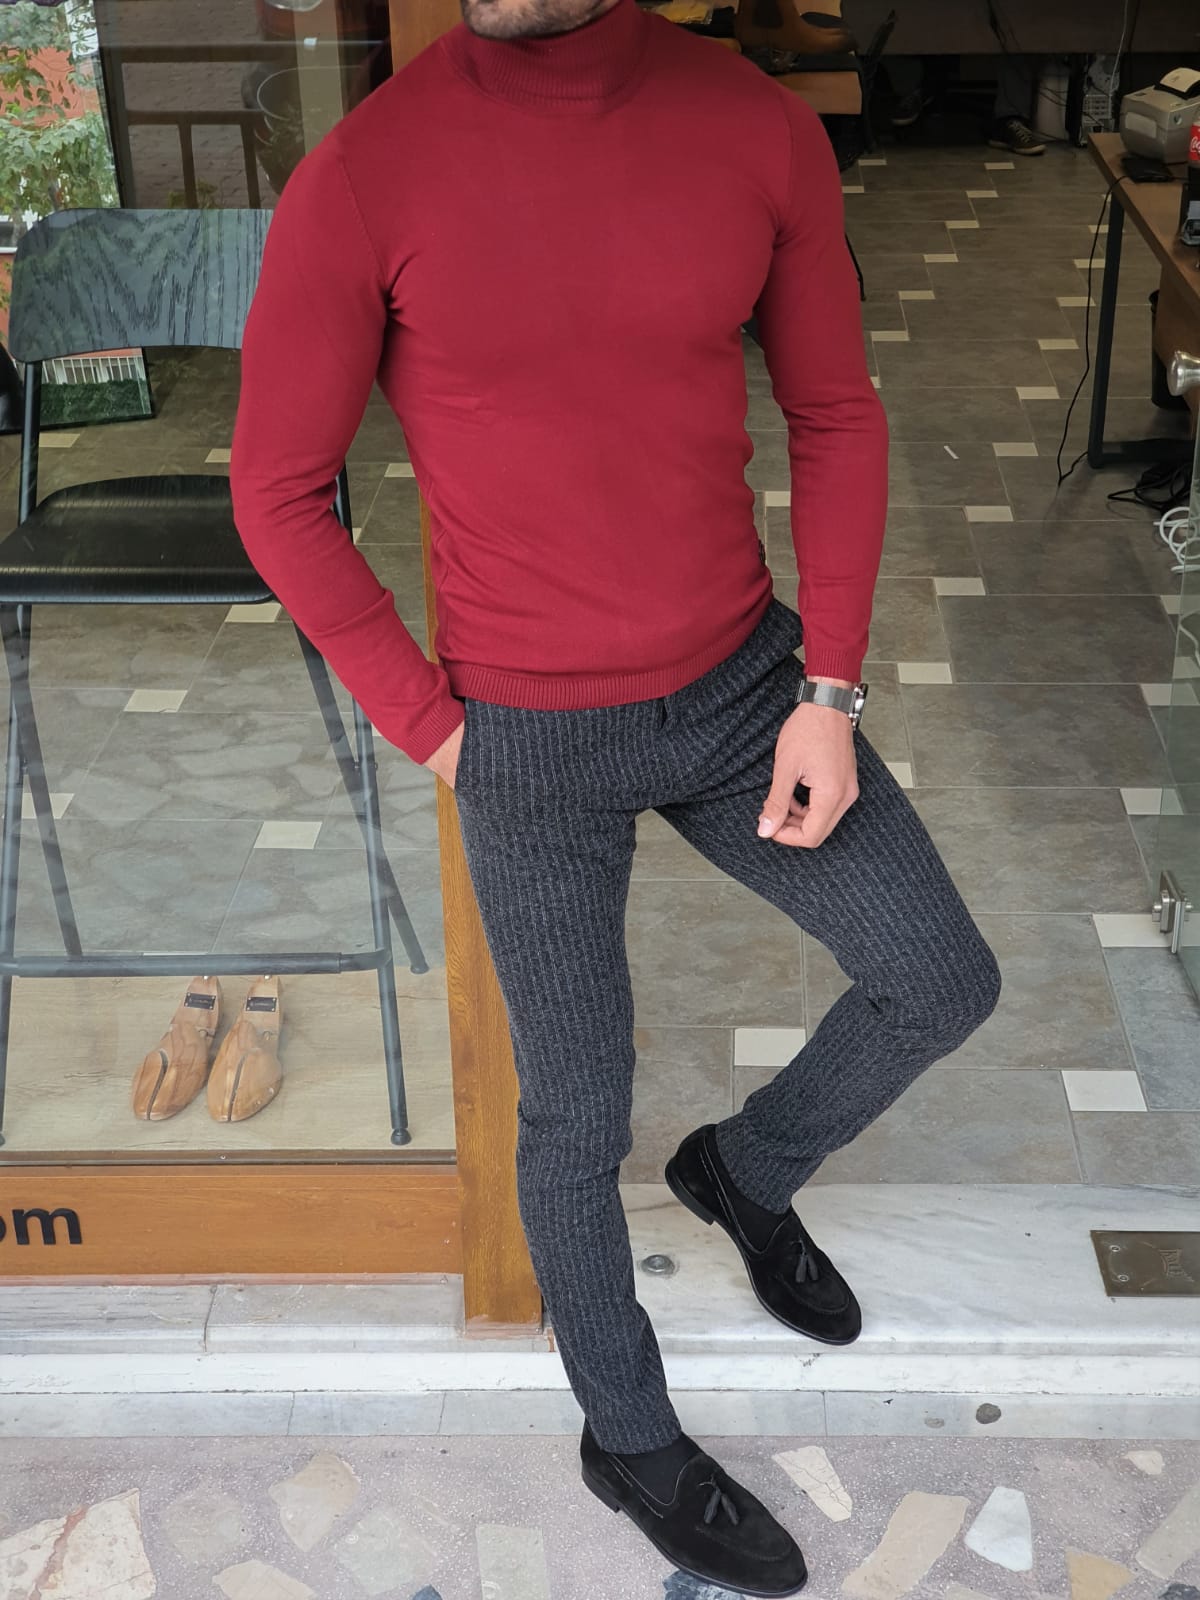 Buy Red Slim Fit Turtleneck Wool Sweater by GentWith | Free Shipping